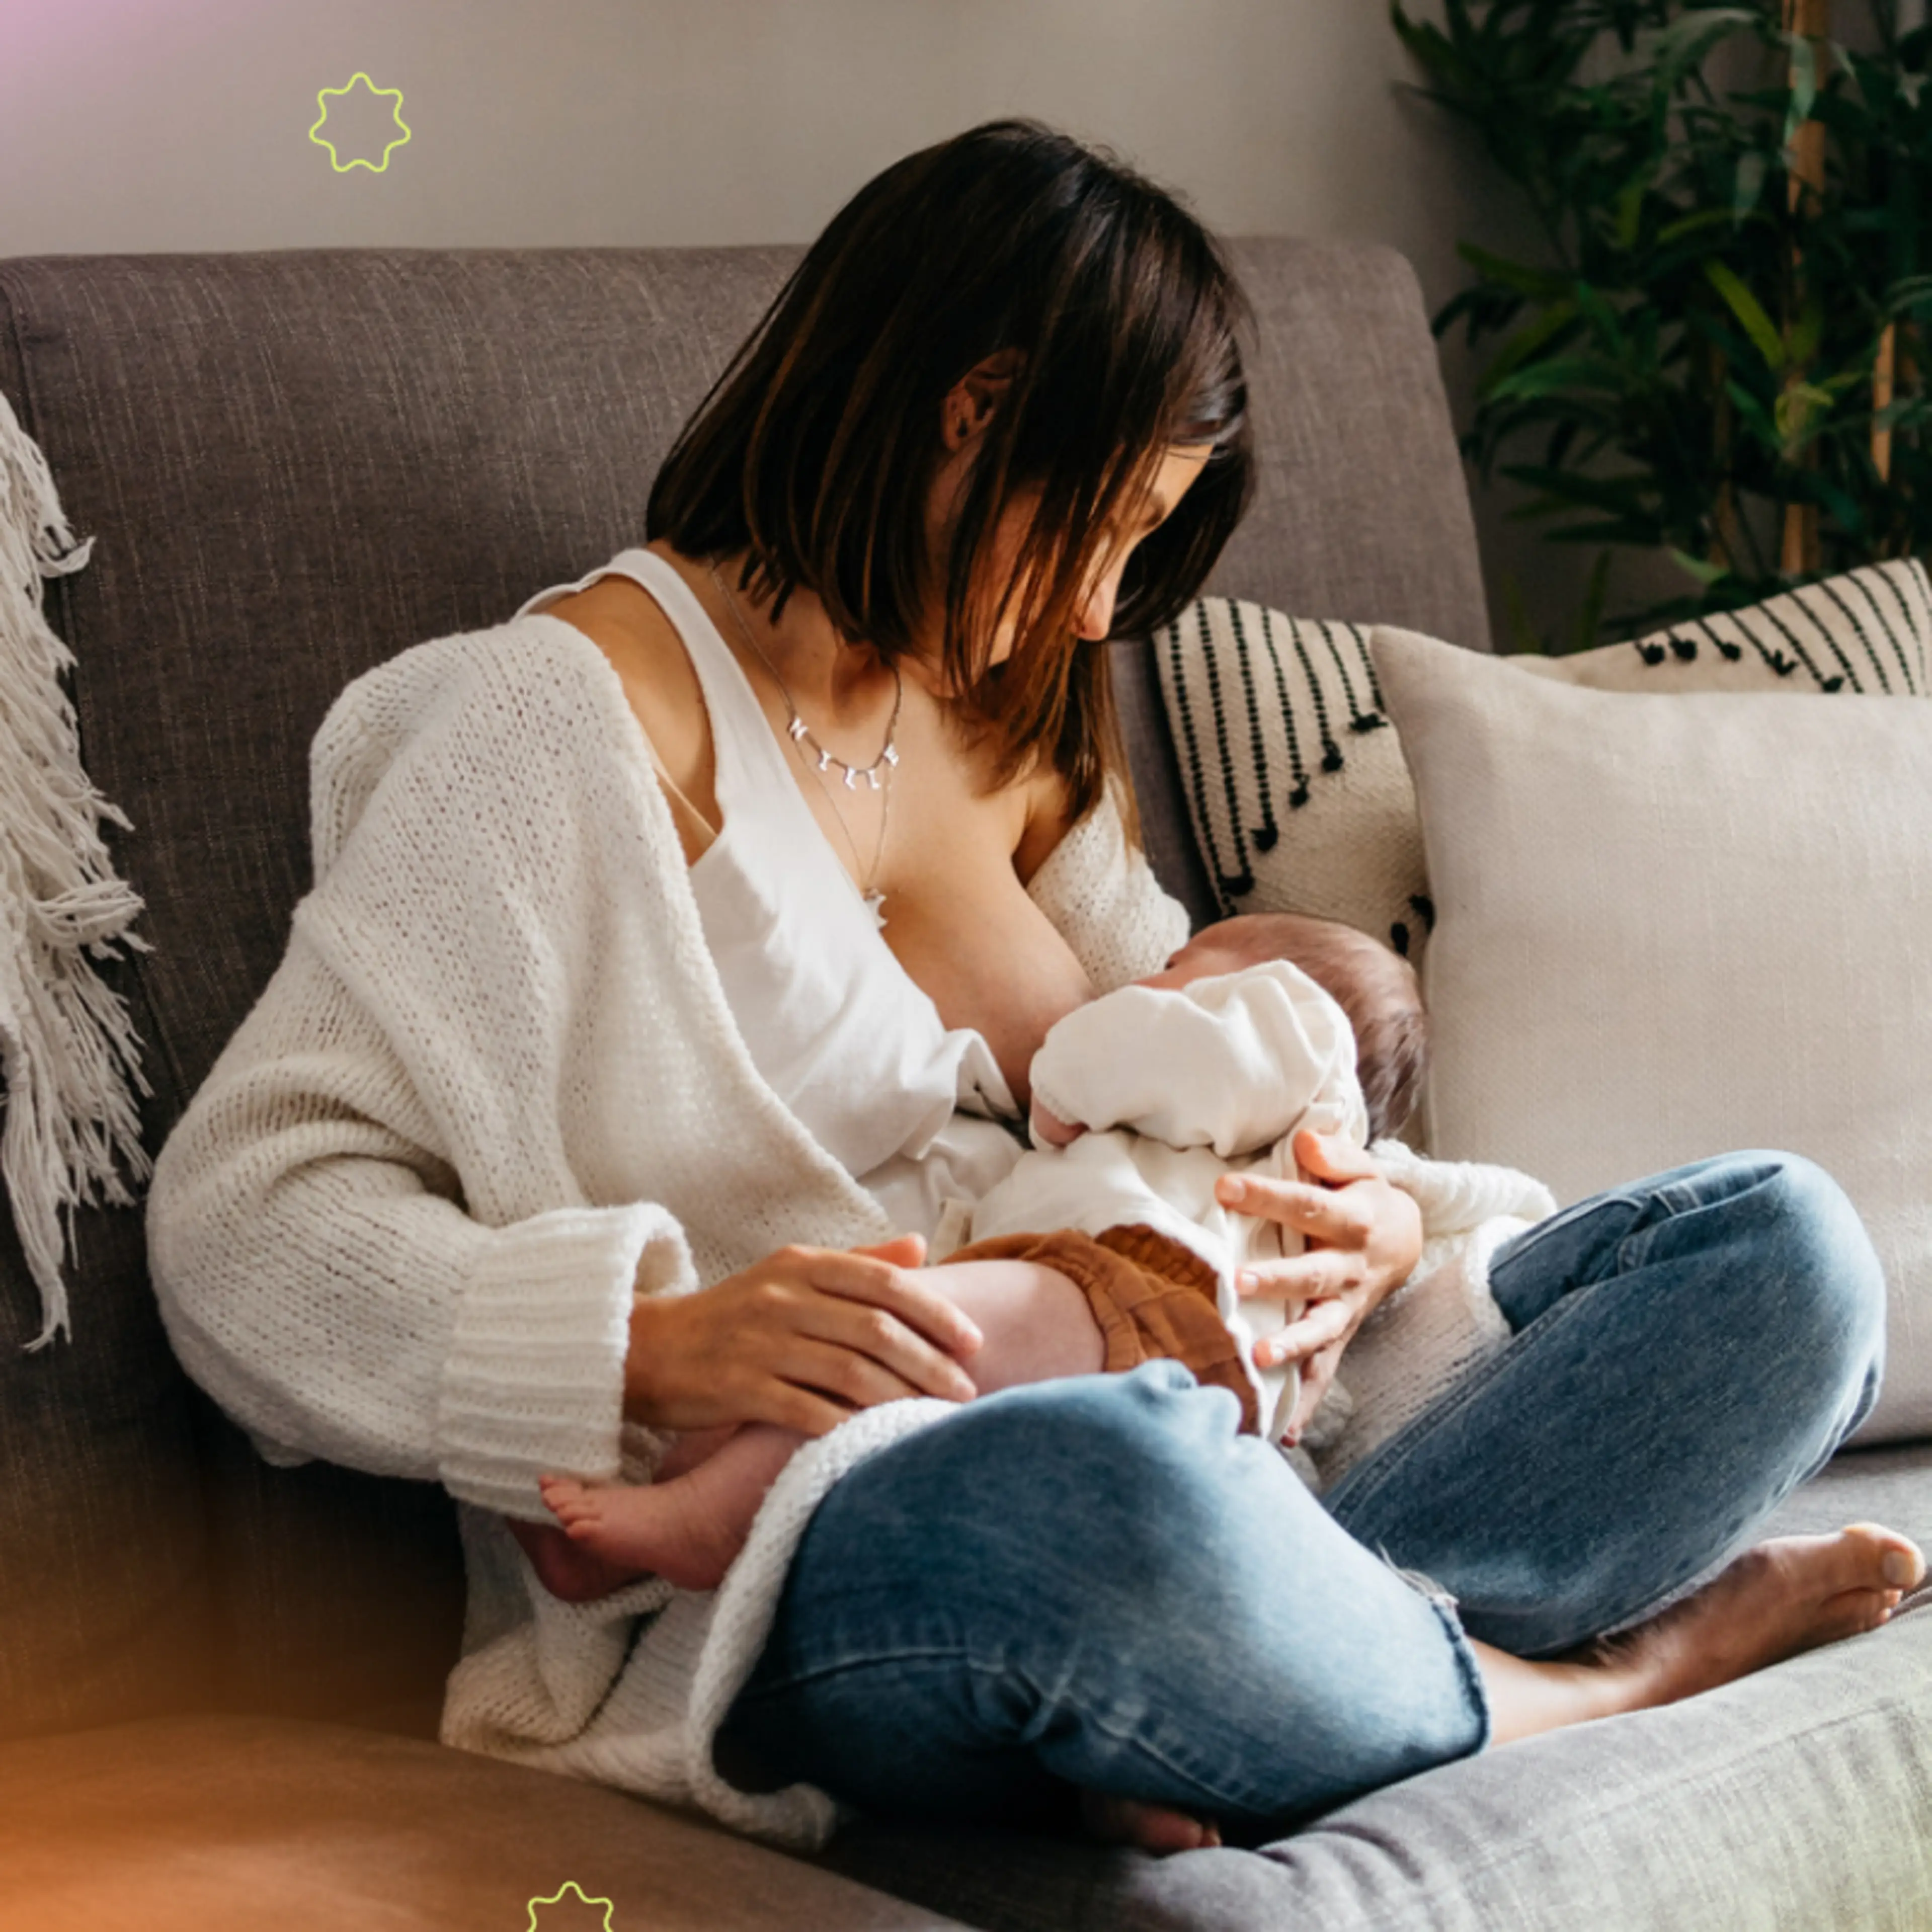 From Shopping to Binge Watching, New Moms Share Their Feeding Time Rituals